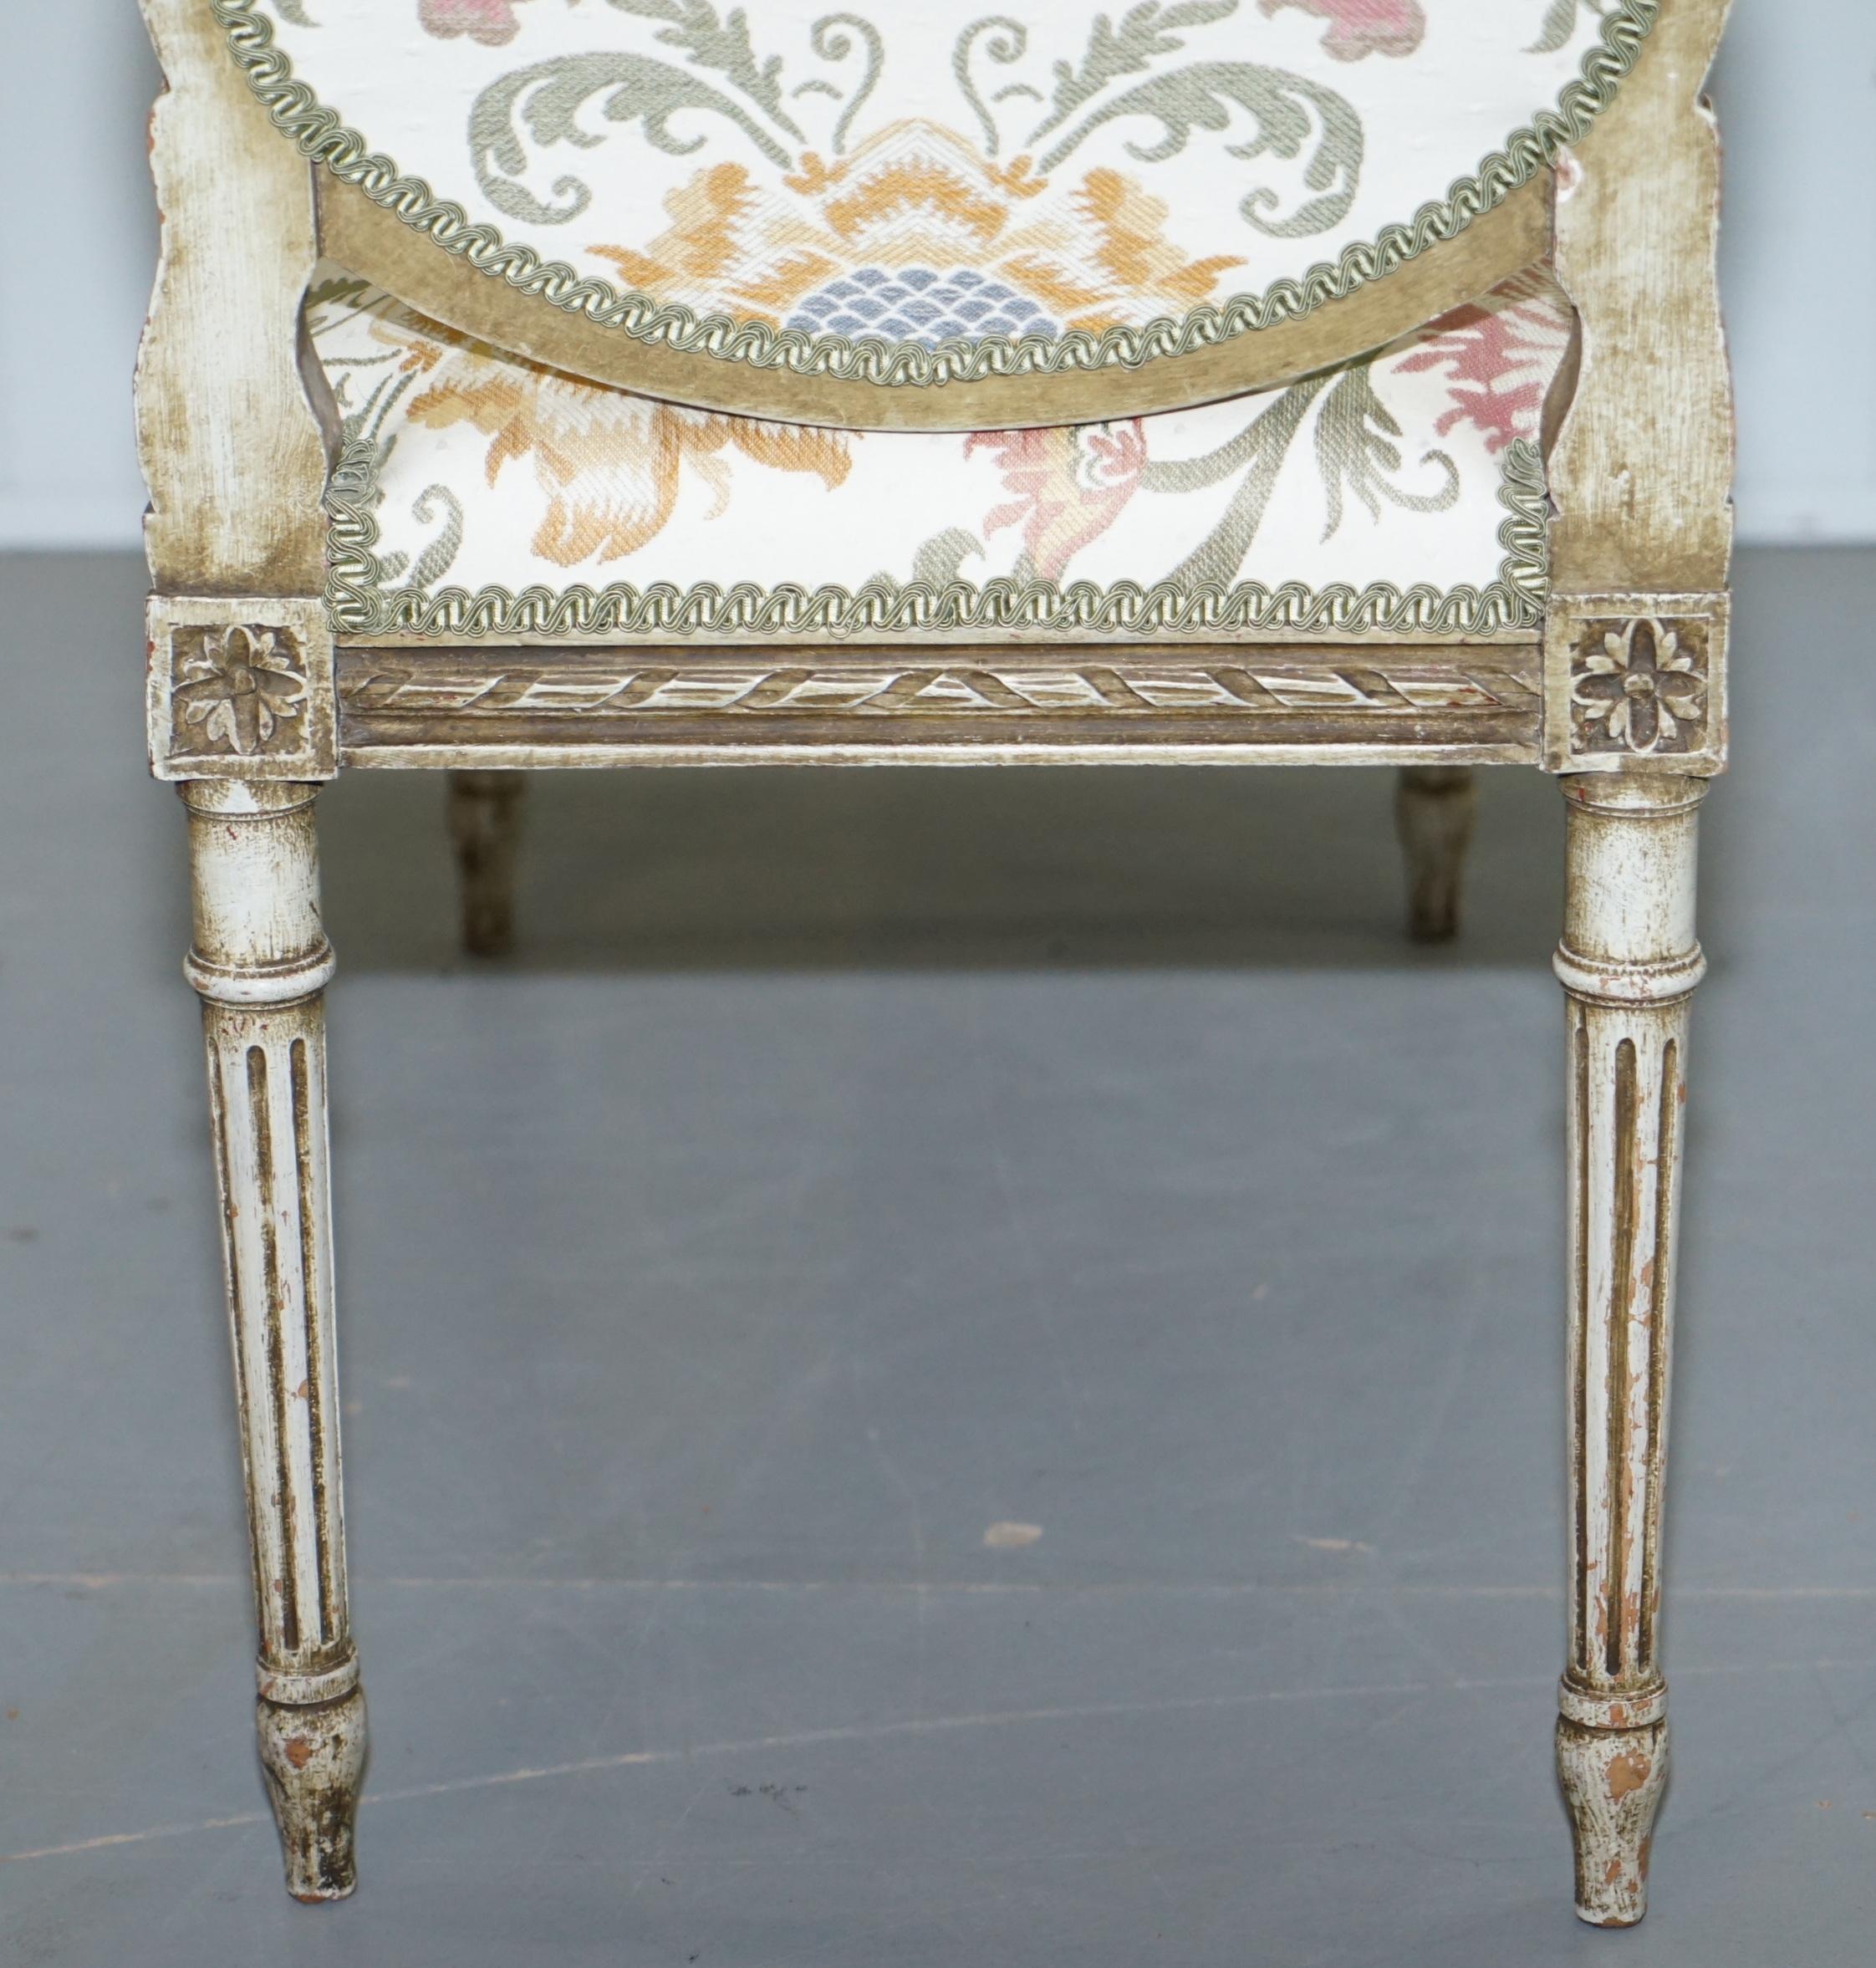 Lovely French Louis XVI Style Renaissance Revival Hand Painted Window Seat Bench 13